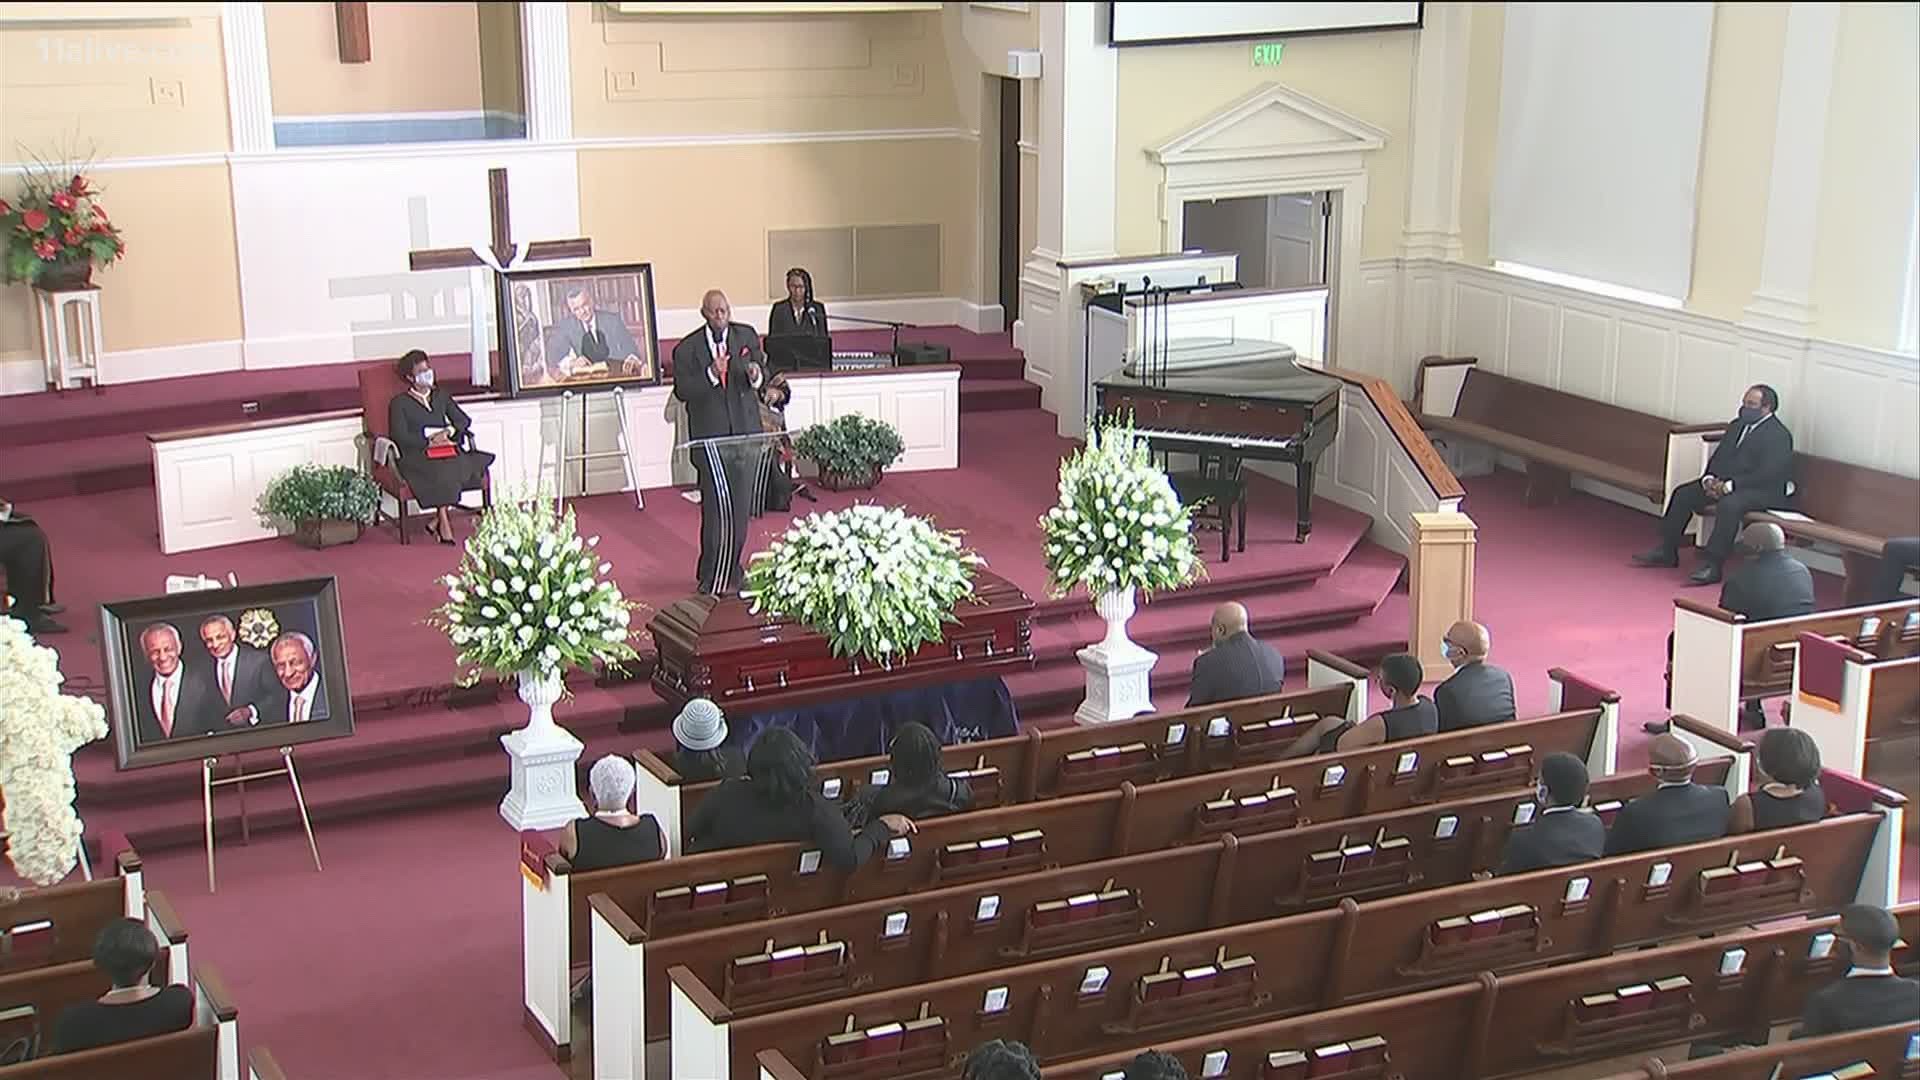 He died last week at his Atlanta home. His funeral was held Thursday.